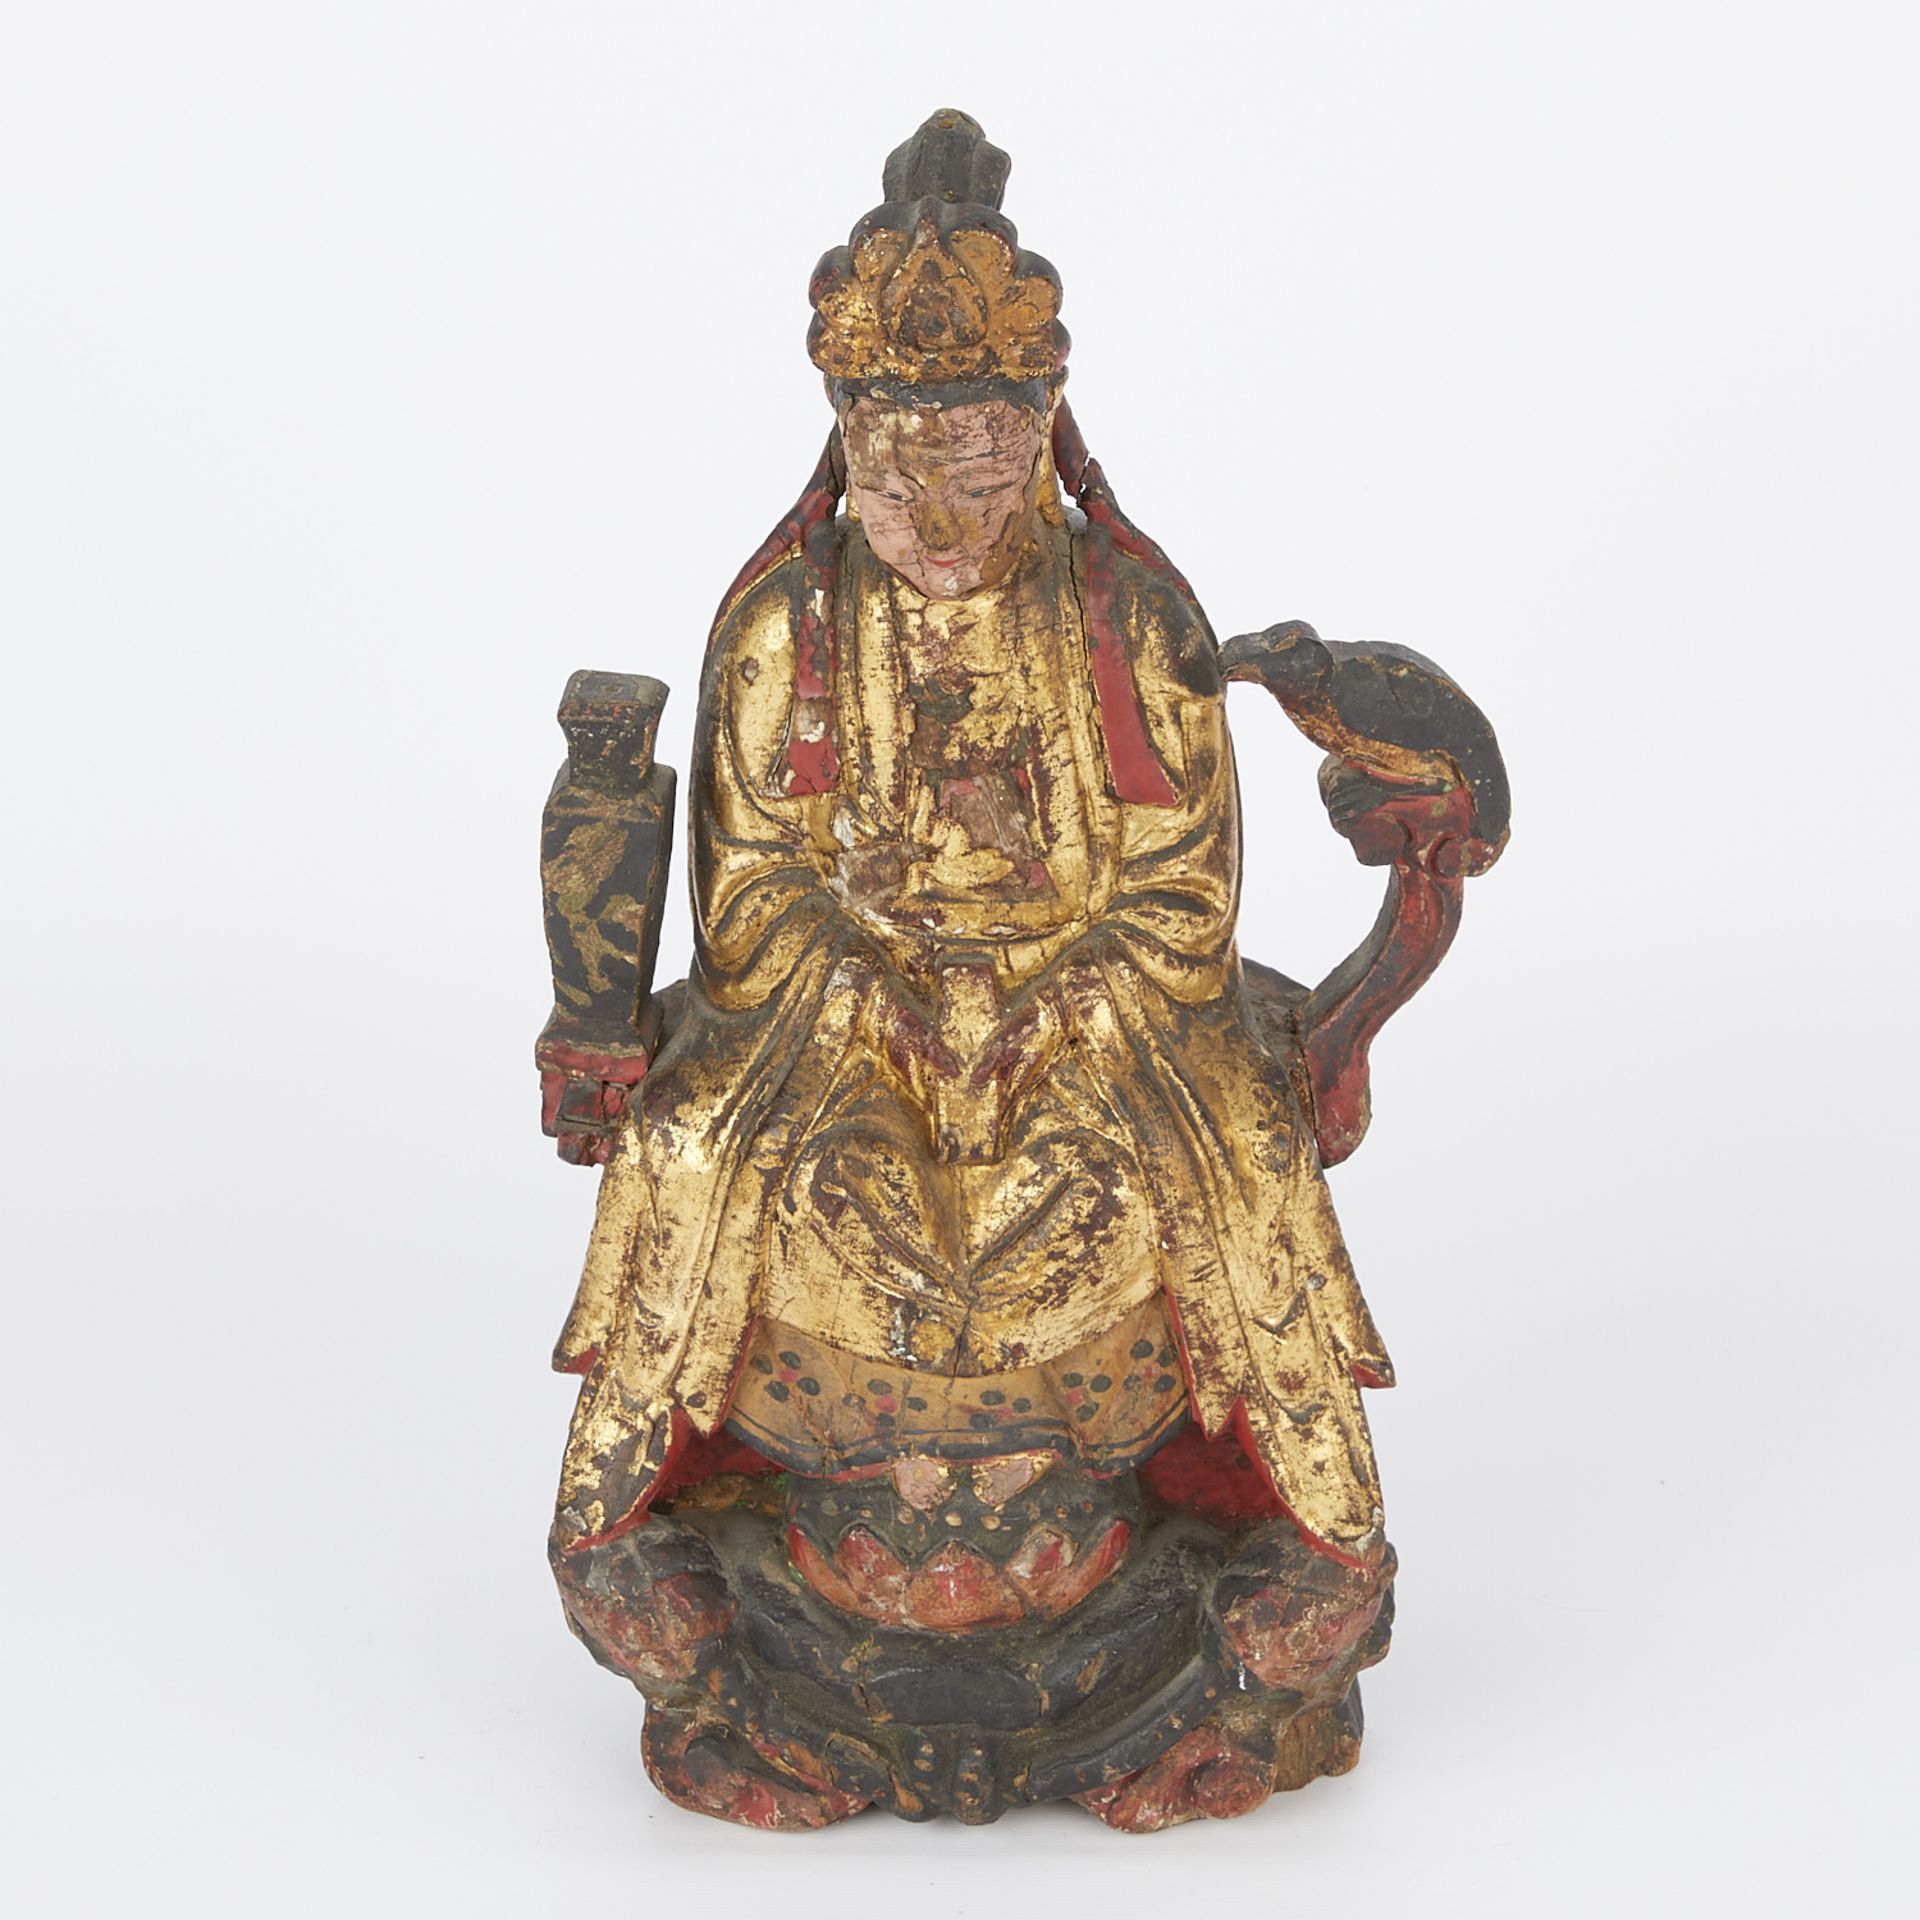 18th-19th c. Chinese Gilt Wooden Guanyin - Image 7 of 9